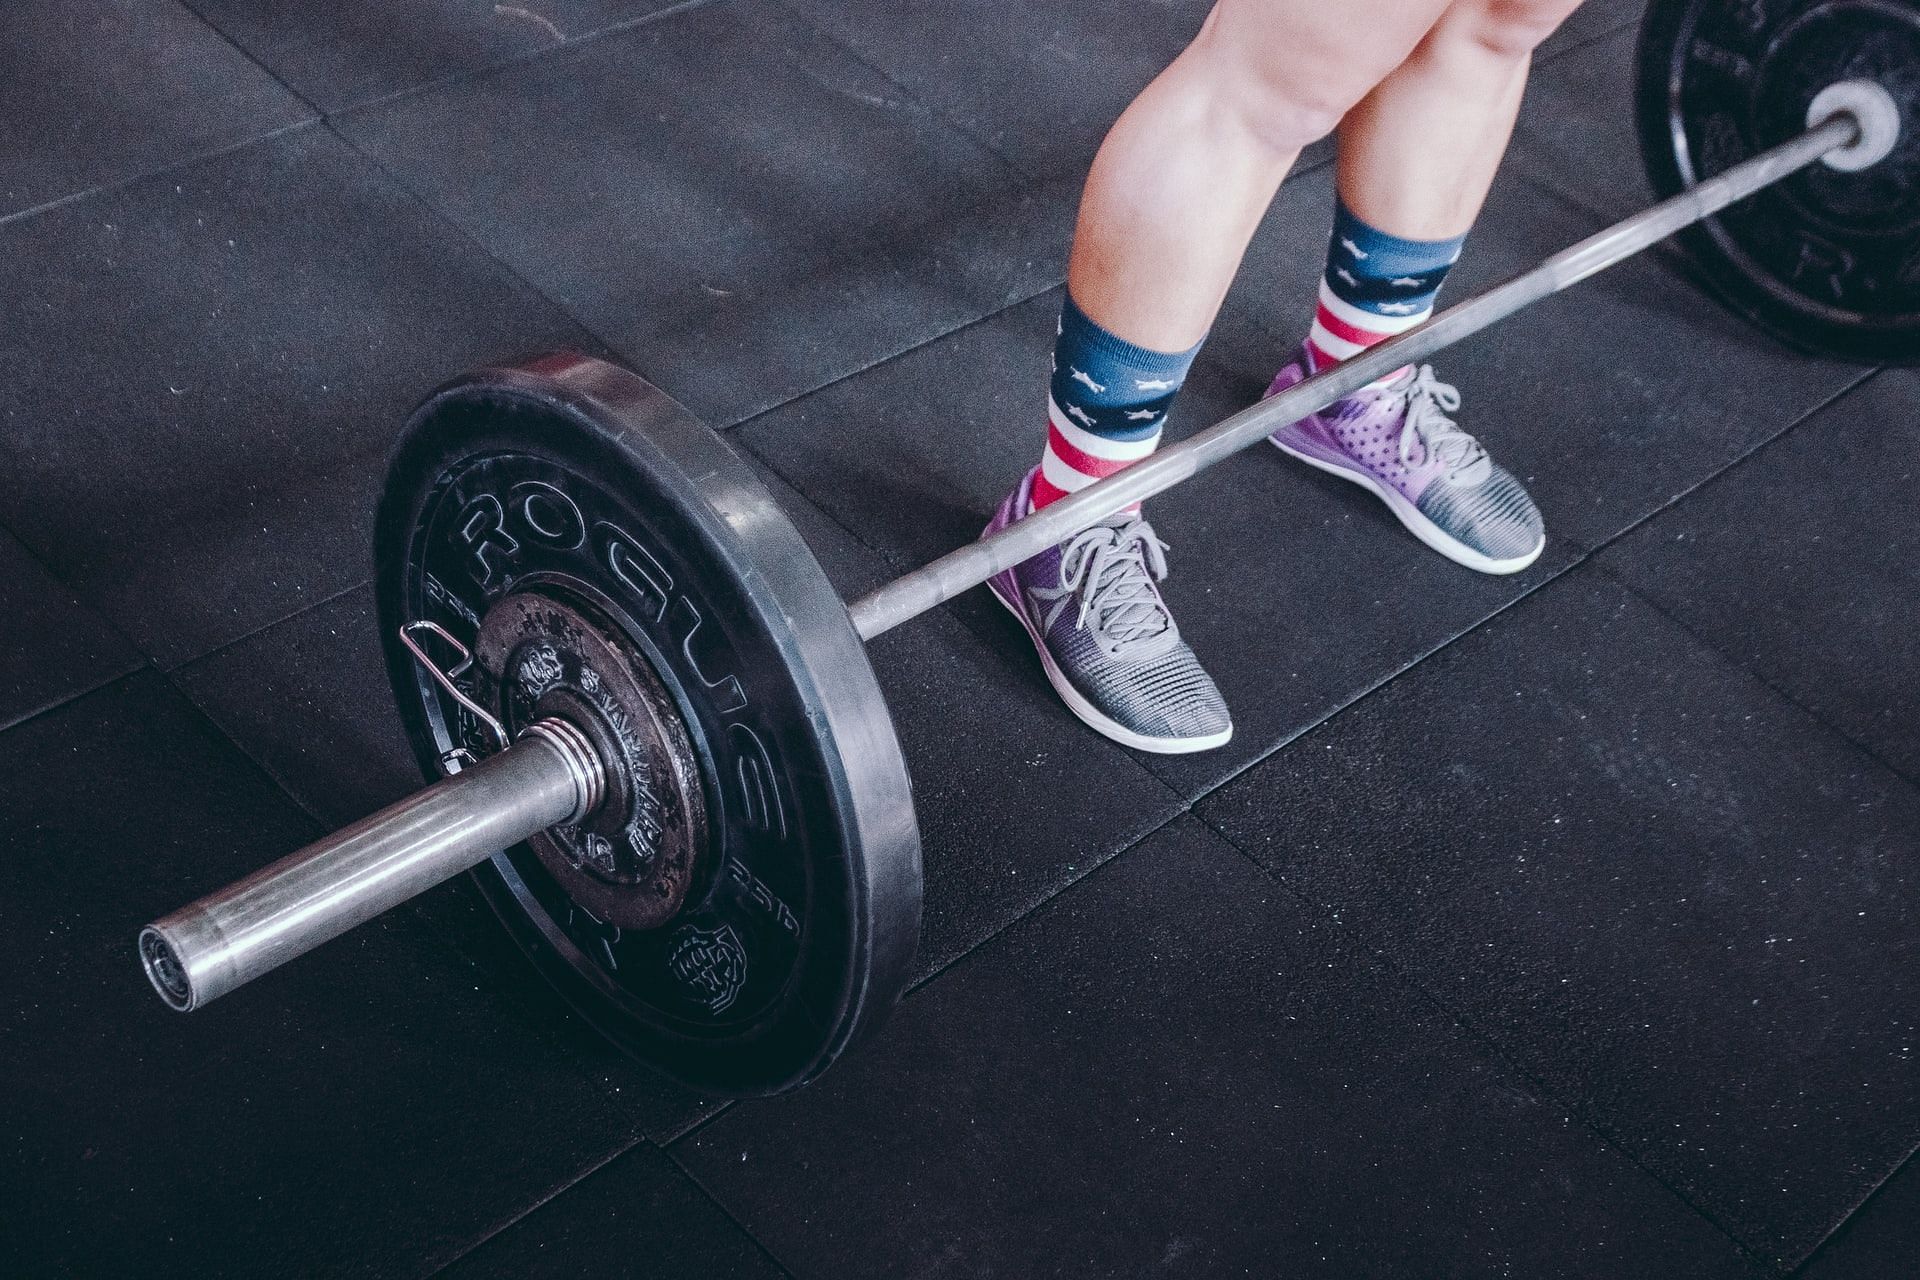 Guide to lower body exercises for beginners. (Image via Unsplash/Photo by @victorfreitas)